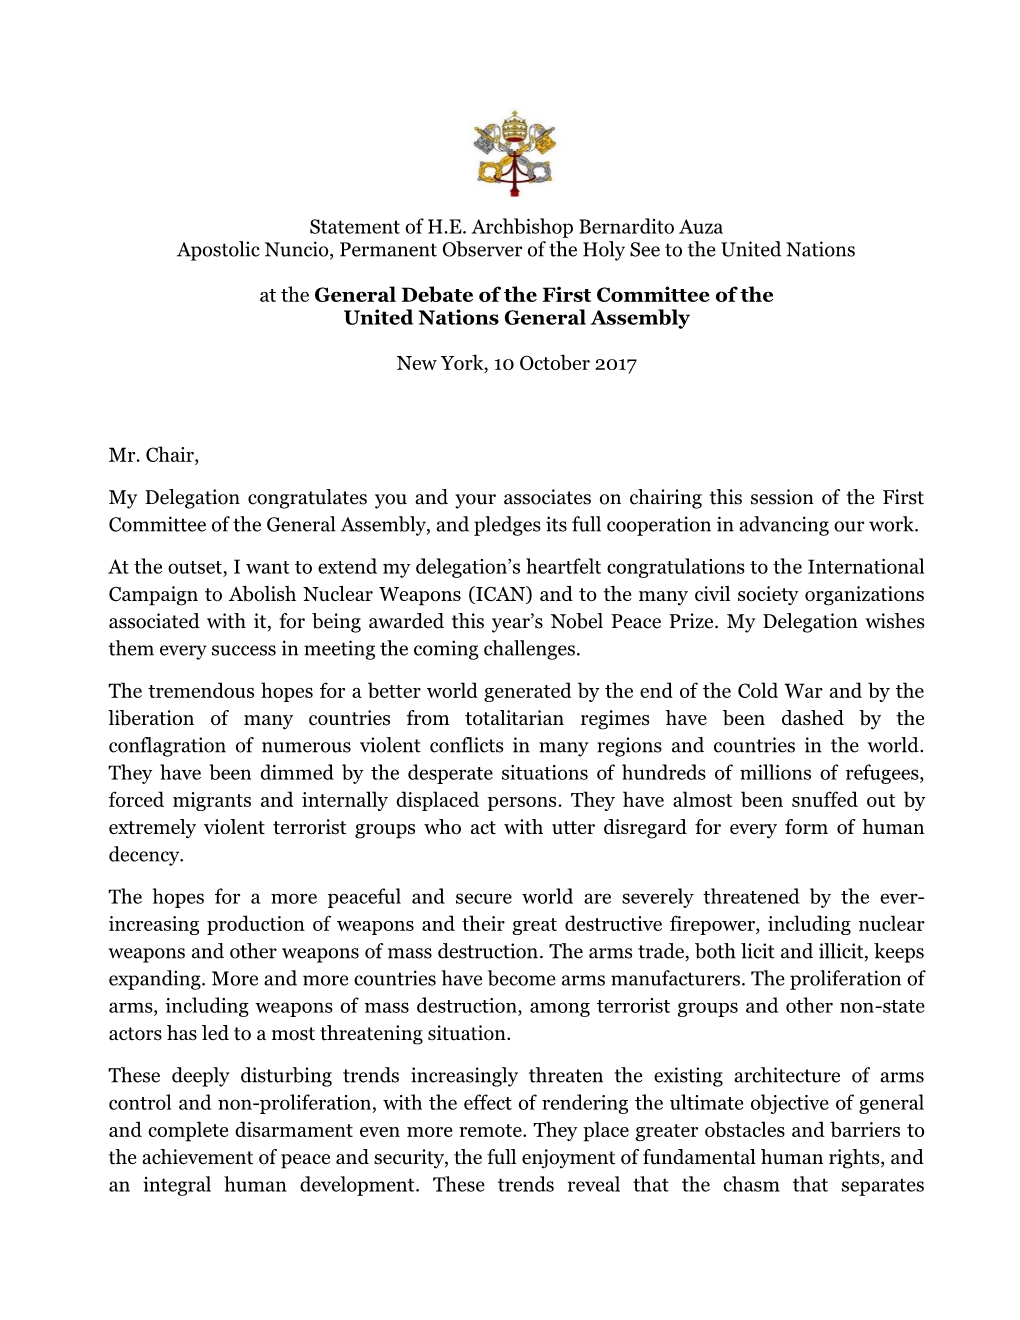 Statement of H.E. Archbishop Bernardito Auza Apostolic Nuncio, Permanent Observer of the Holy See to the United Nations